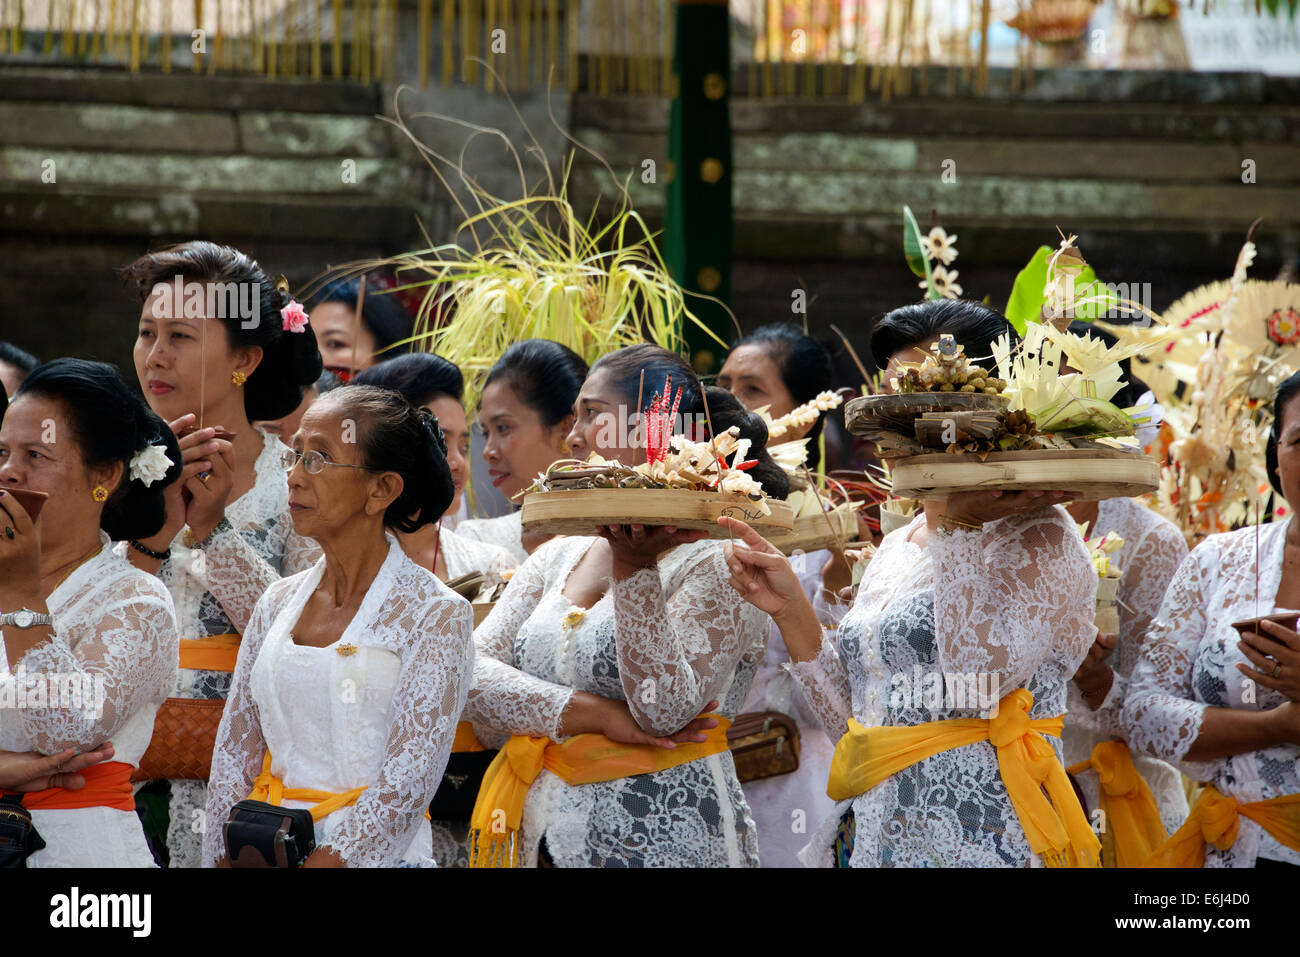 Religious ceremony with offerings Mengwi Bali Indonesia Stock Photo